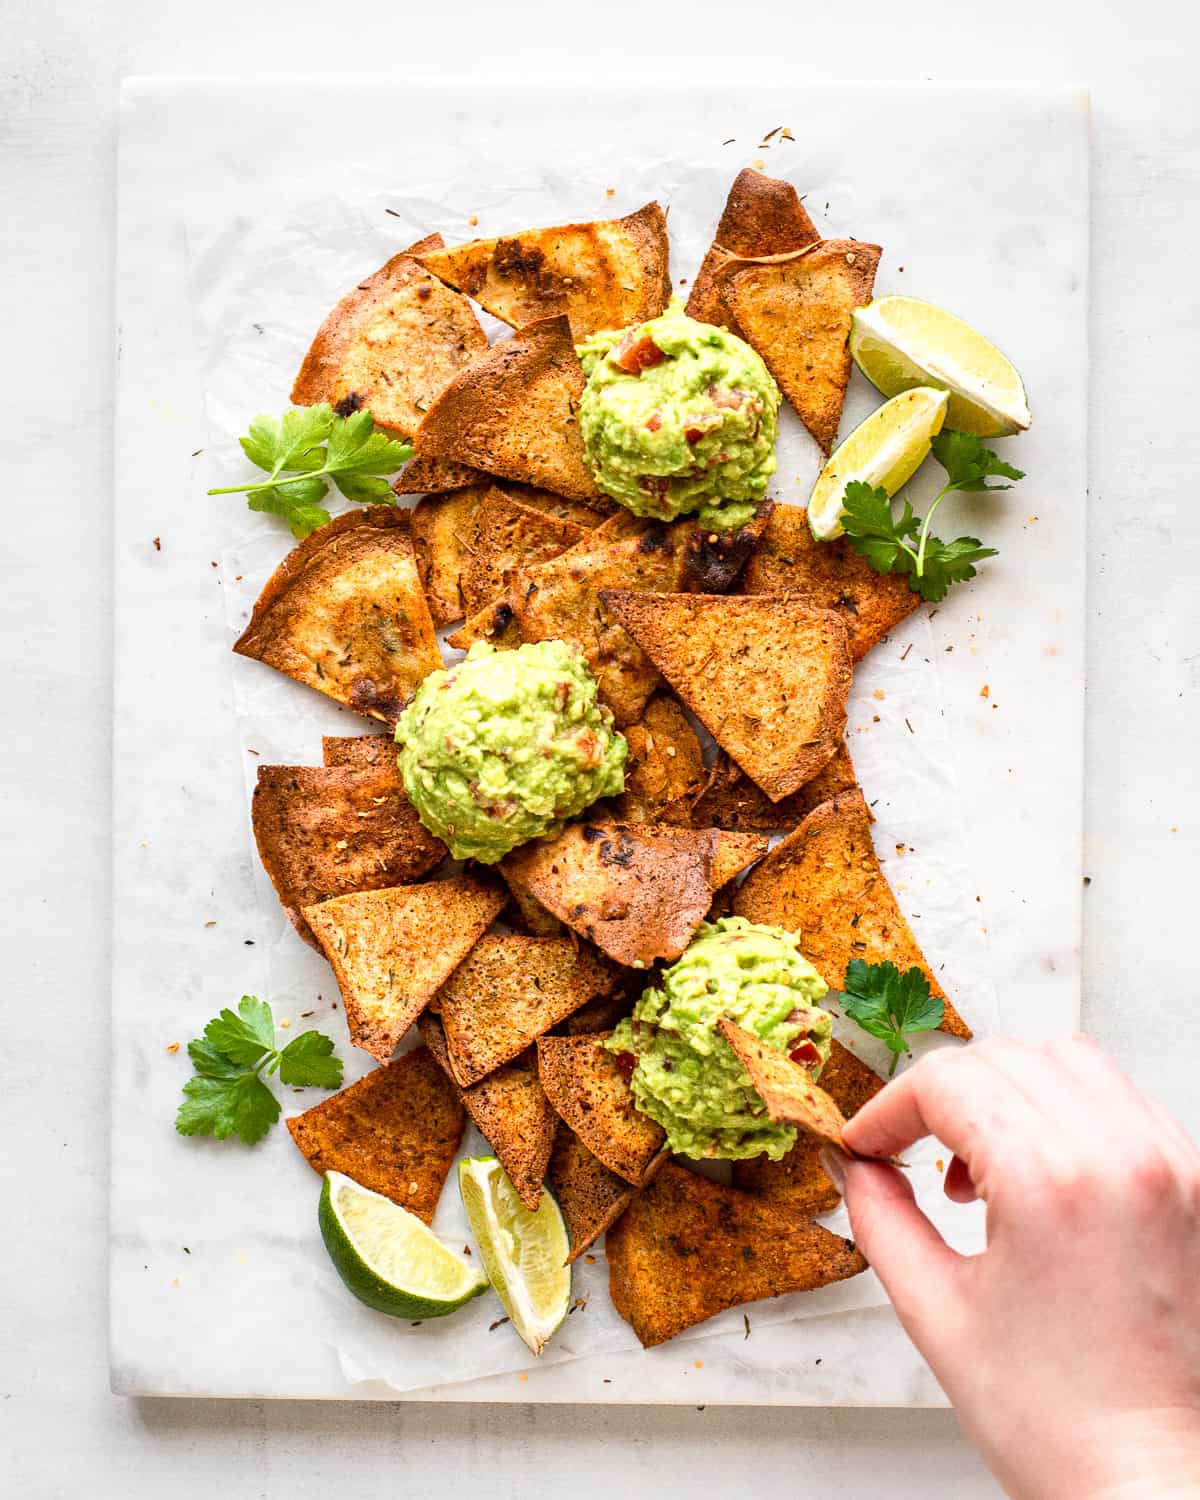 Hand dipping a nacho in some guacamole on a white marble platter.